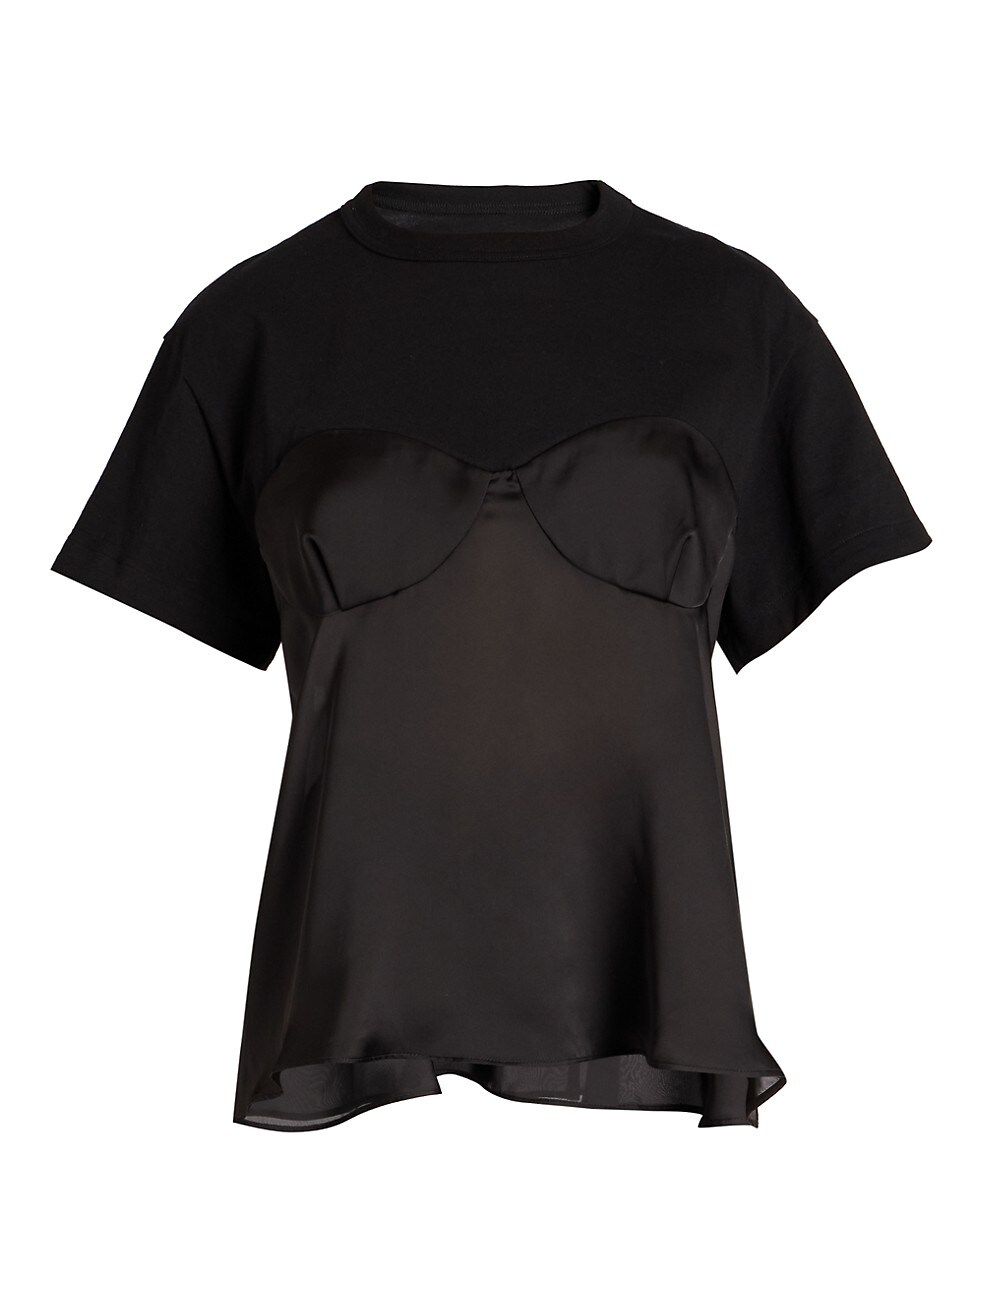 Molded Cups T-Shirt | Saks Fifth Avenue